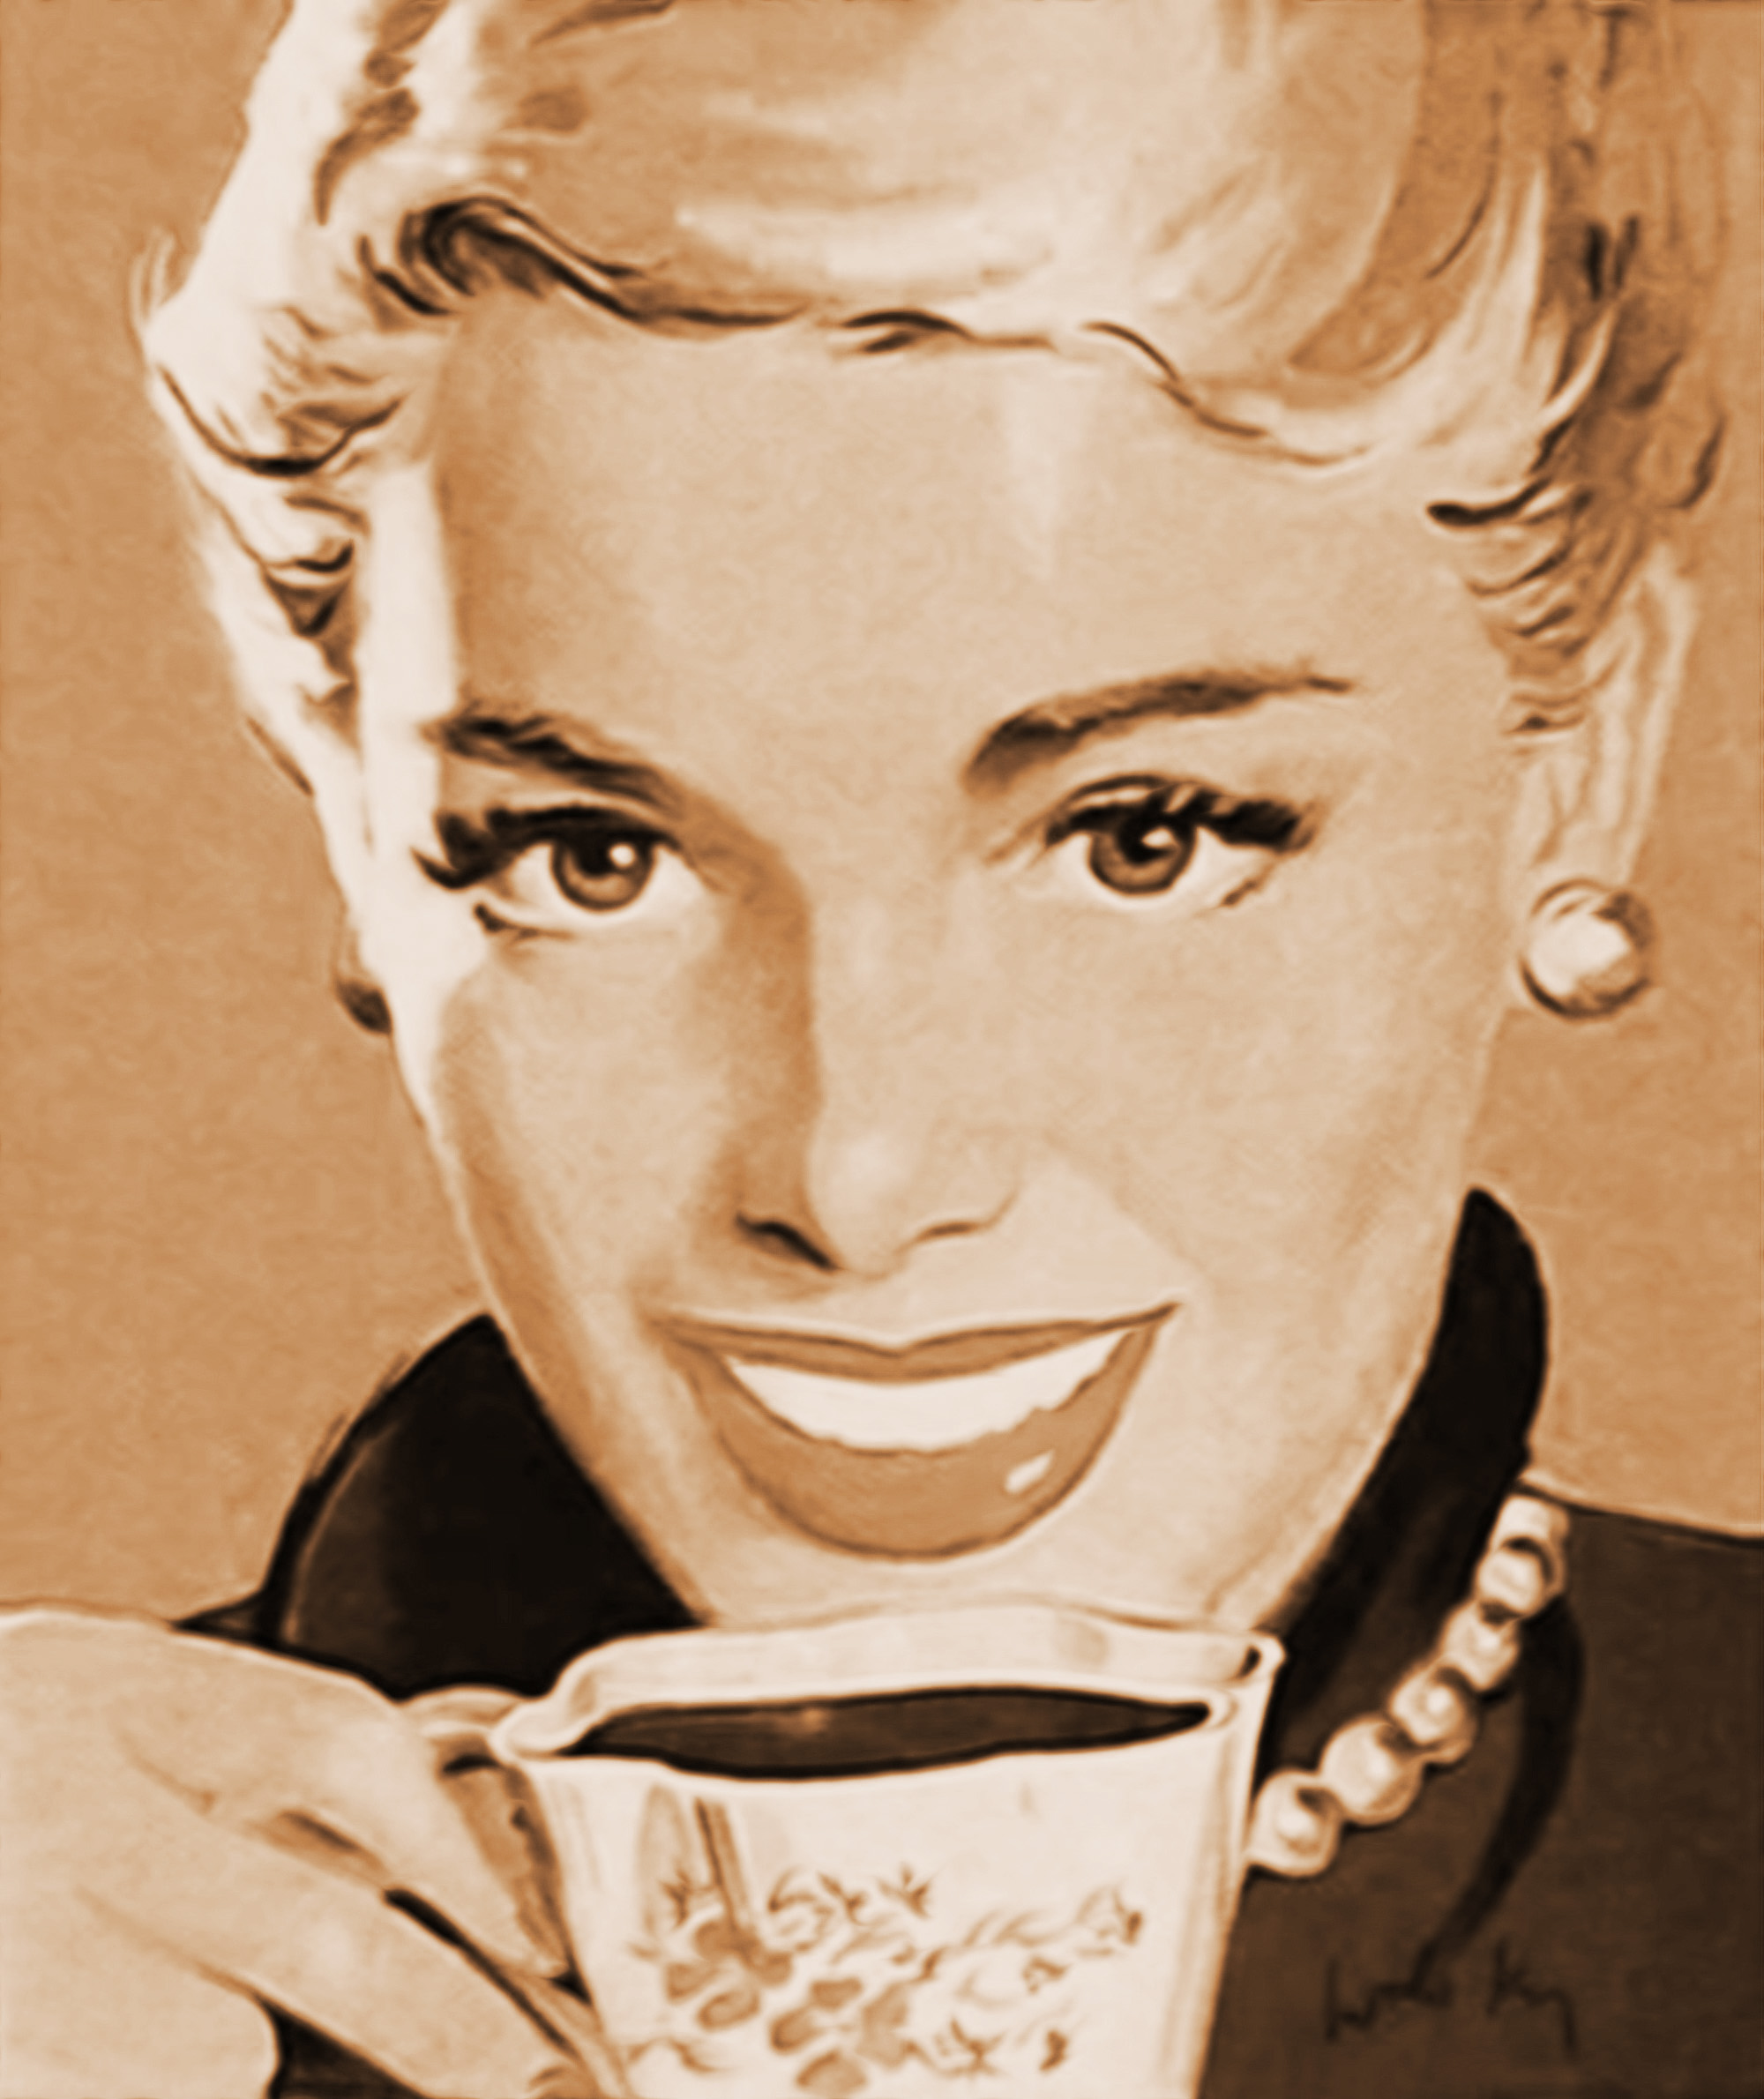 vintage 1960's illustration of a smiling, blonde woman drinking coffee